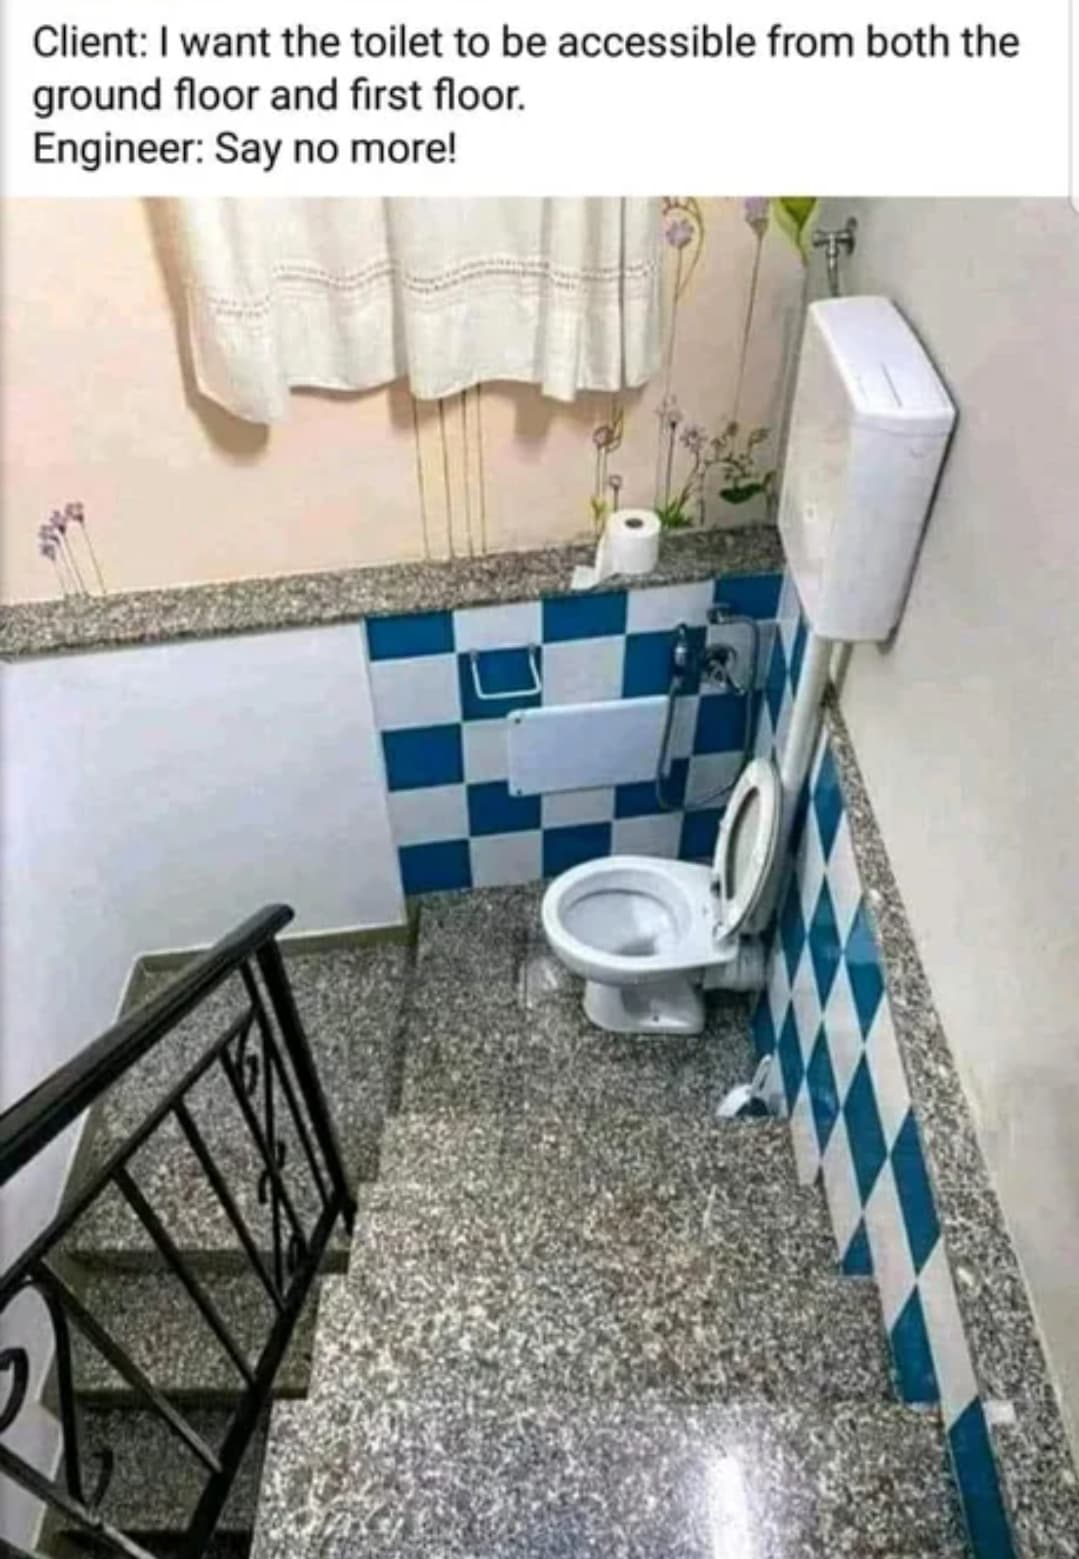 floor - Client I want the toilet to be accessible from both the ground floor and first floor. Engineer Say no more!